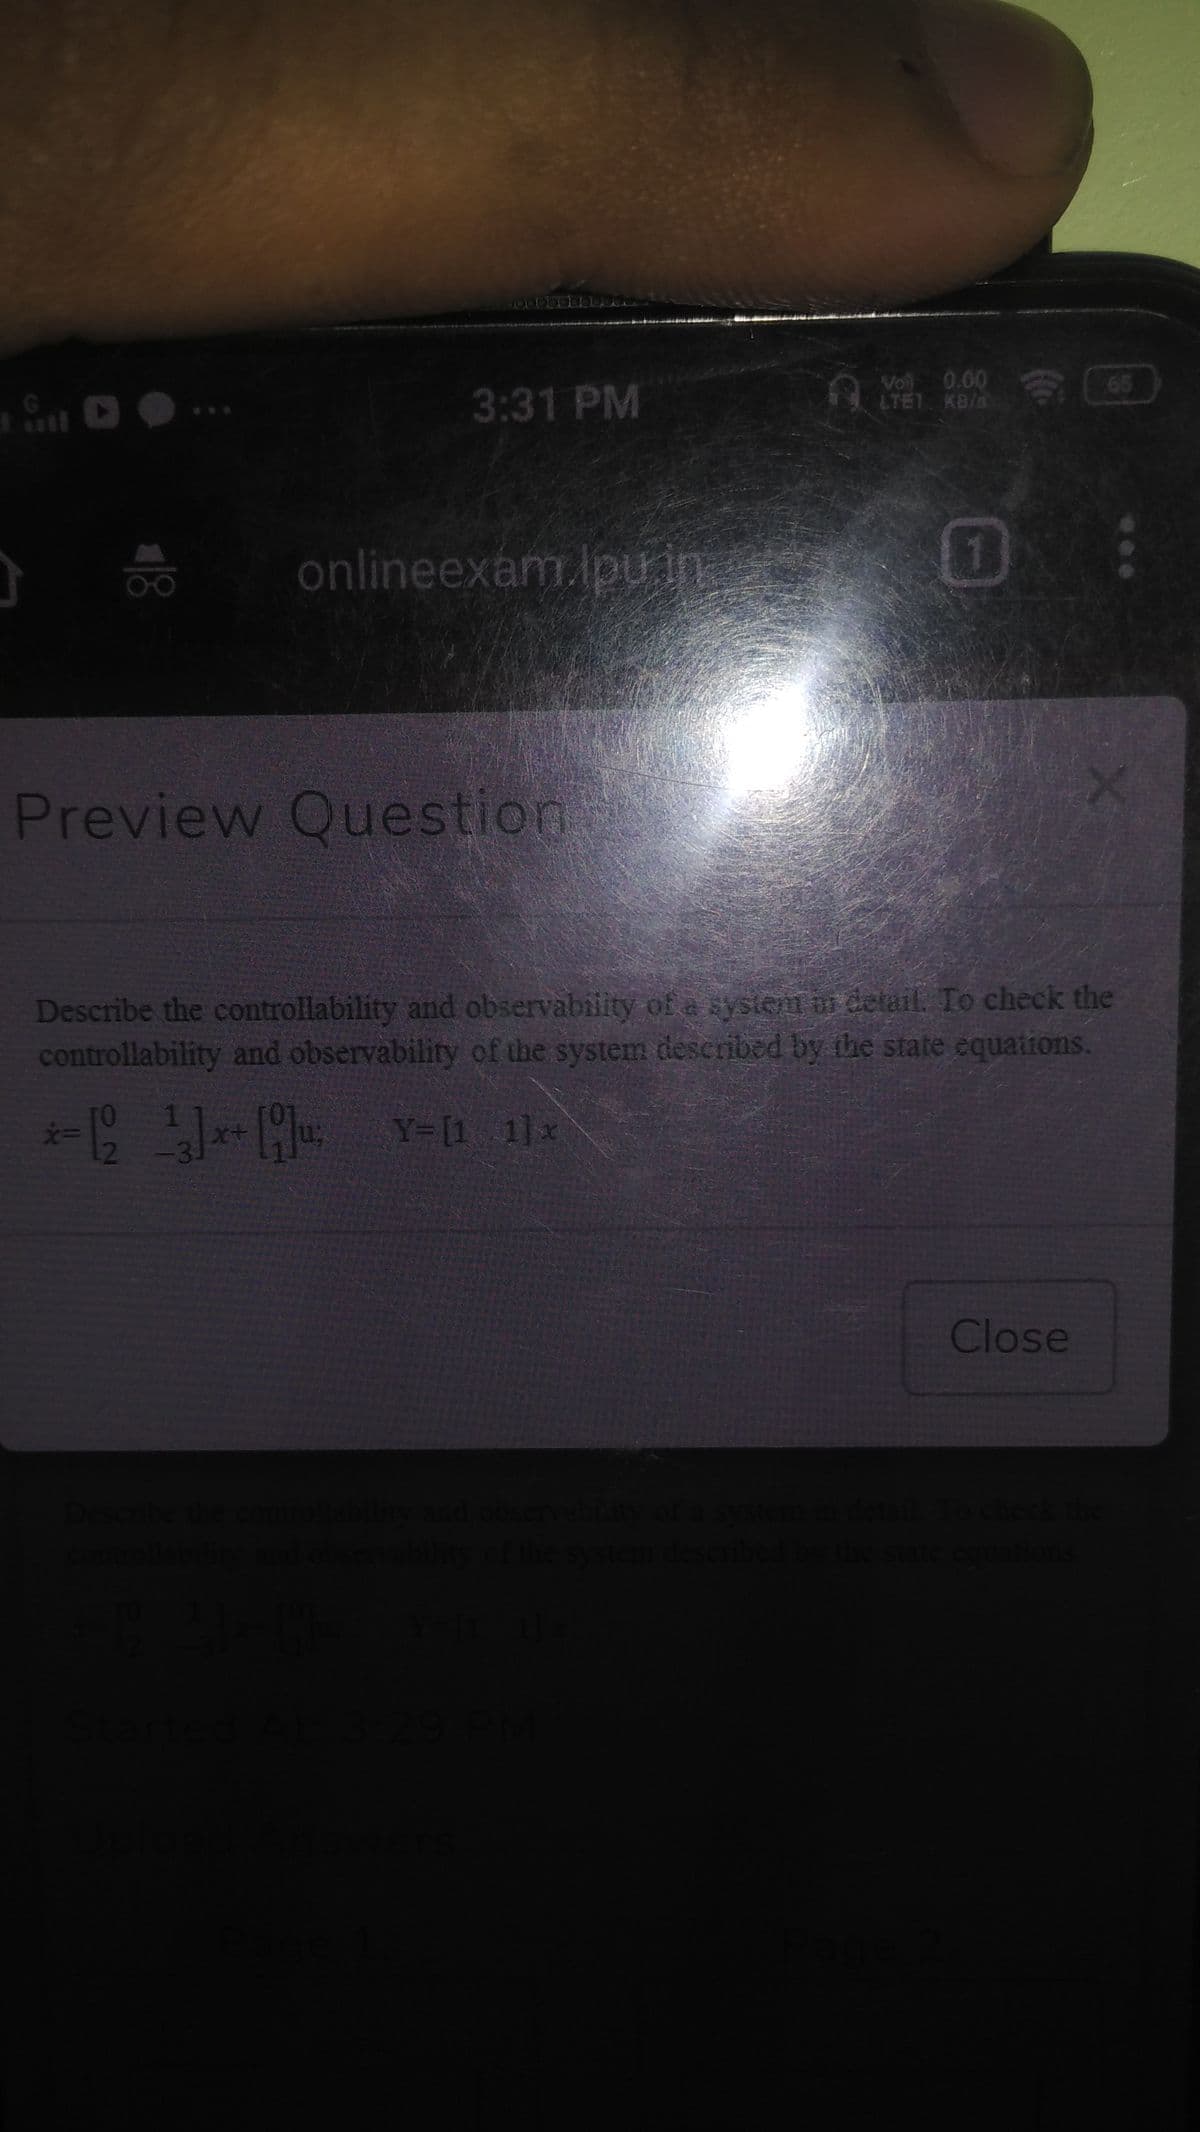 3:31 PM
Vol 0.00
LTE1 KB/s
onlineexam.lpu in
Preview Question
Describe the controllability and observability of a system ir detail. To check the
controllability and observability of the system described by the state equations.
12
Close
418
